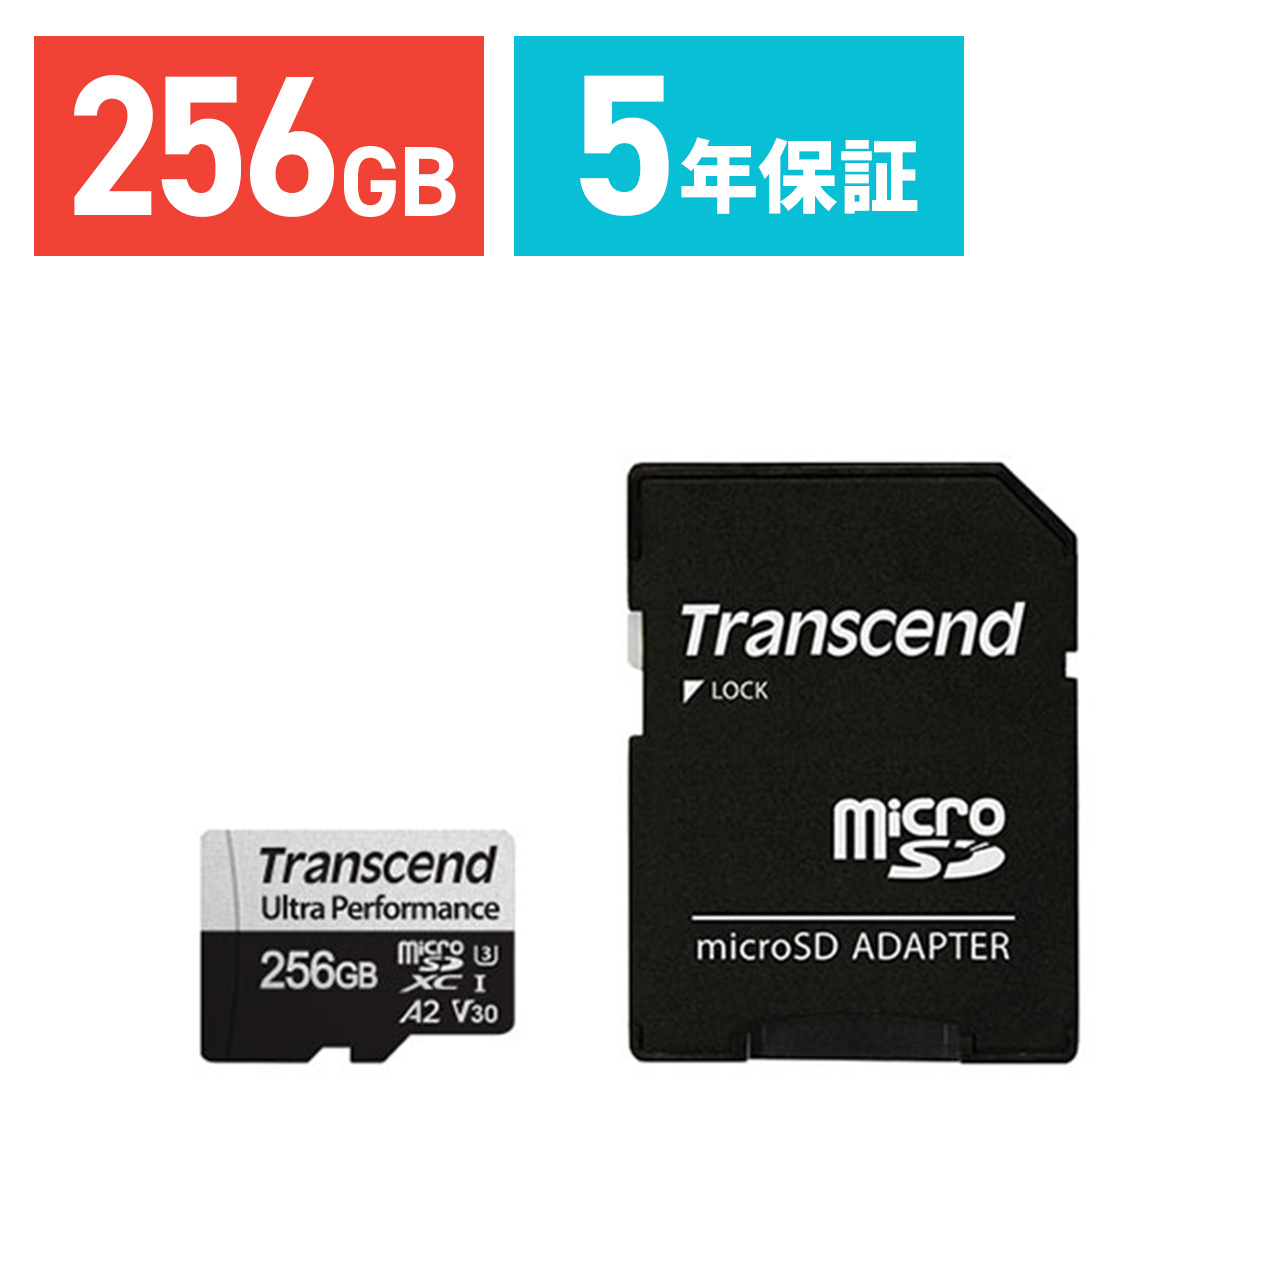 microSDXCJ[h 256GB Class10 UHS-I U3 A2 V30 SDJ[hϊA_v^t Nintendo Switch ROG Ally Ή Transcend TS256GUSD340S